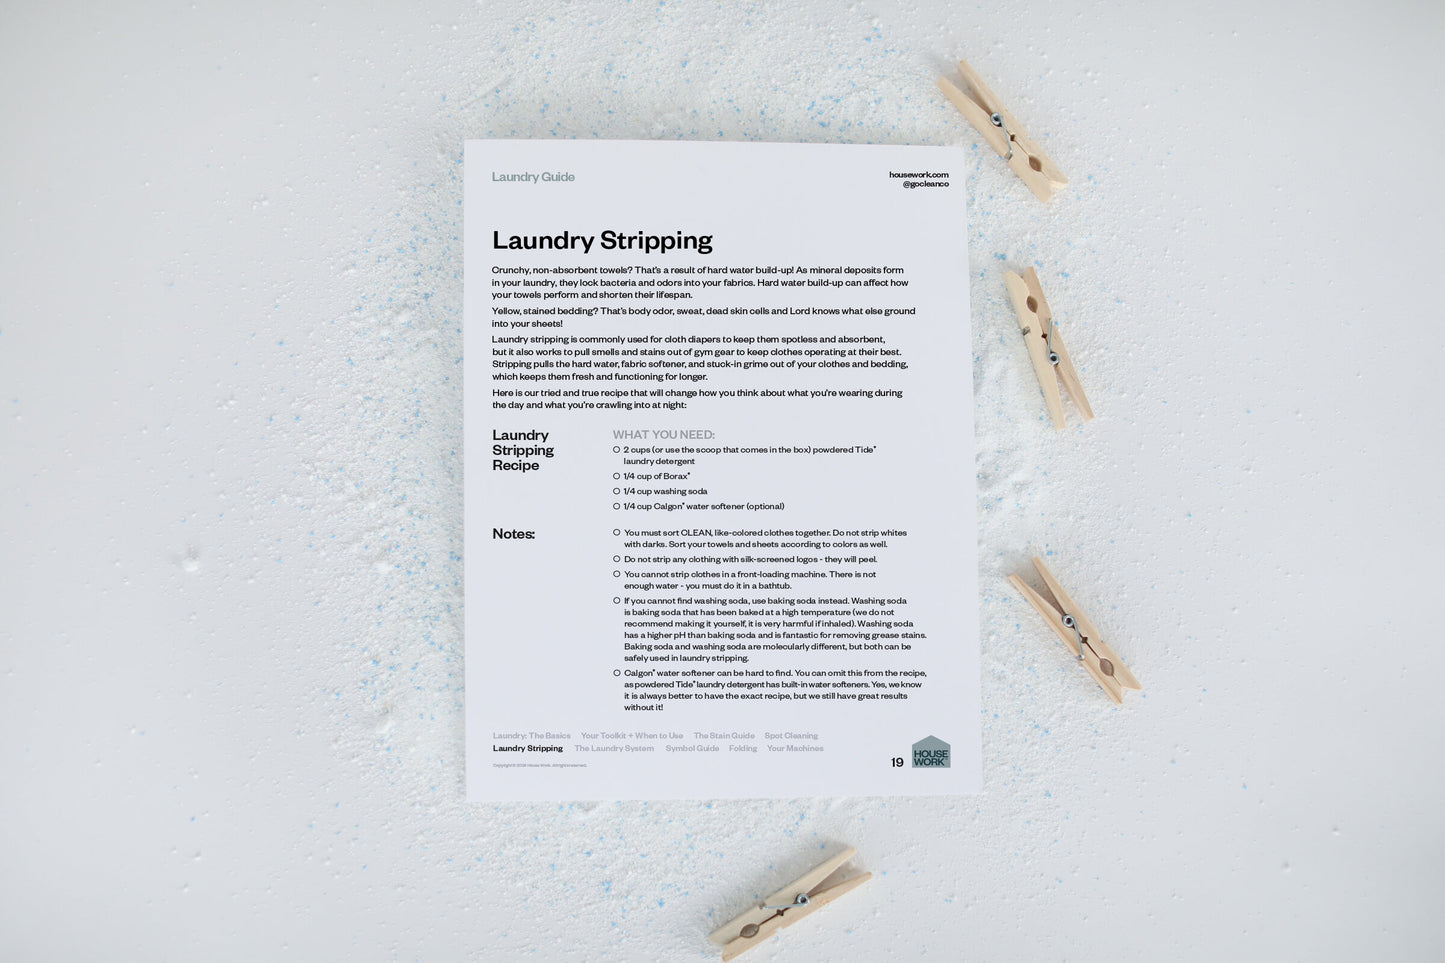 Cleaning Calendar 2024 + Laundry Guide Bundle